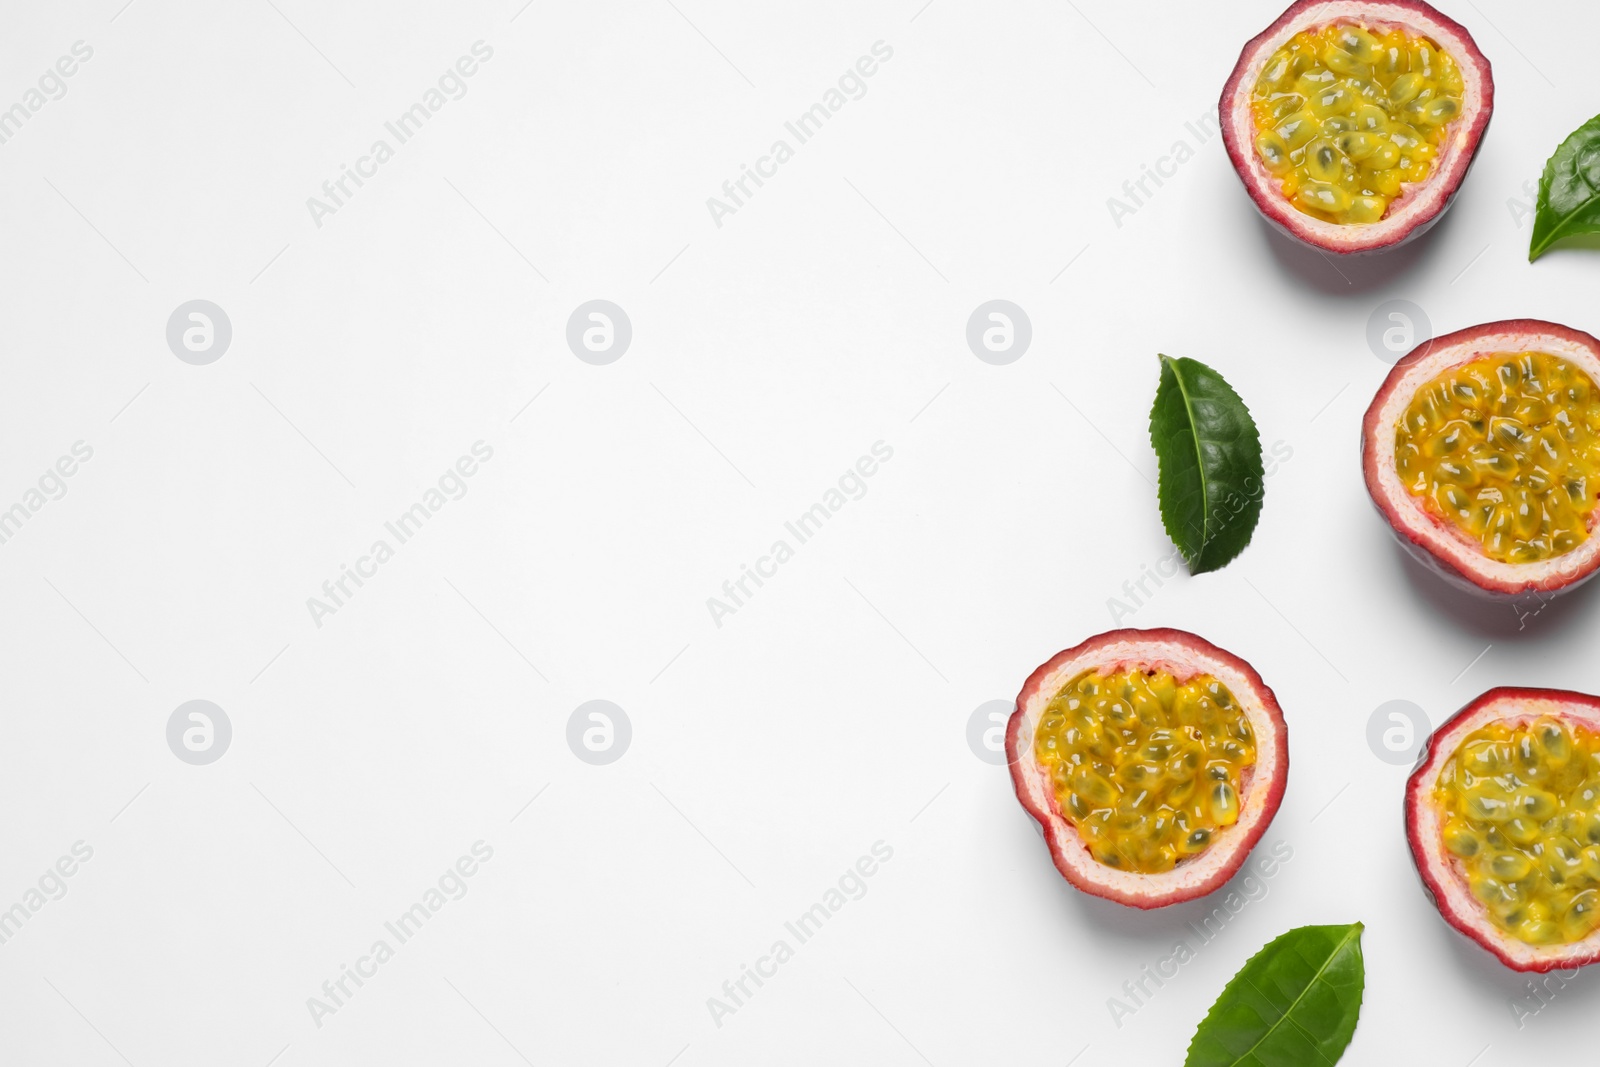 Photo of Halves of passion fruits (maracuyas) and green leaves on white background, flat lay. Space for text